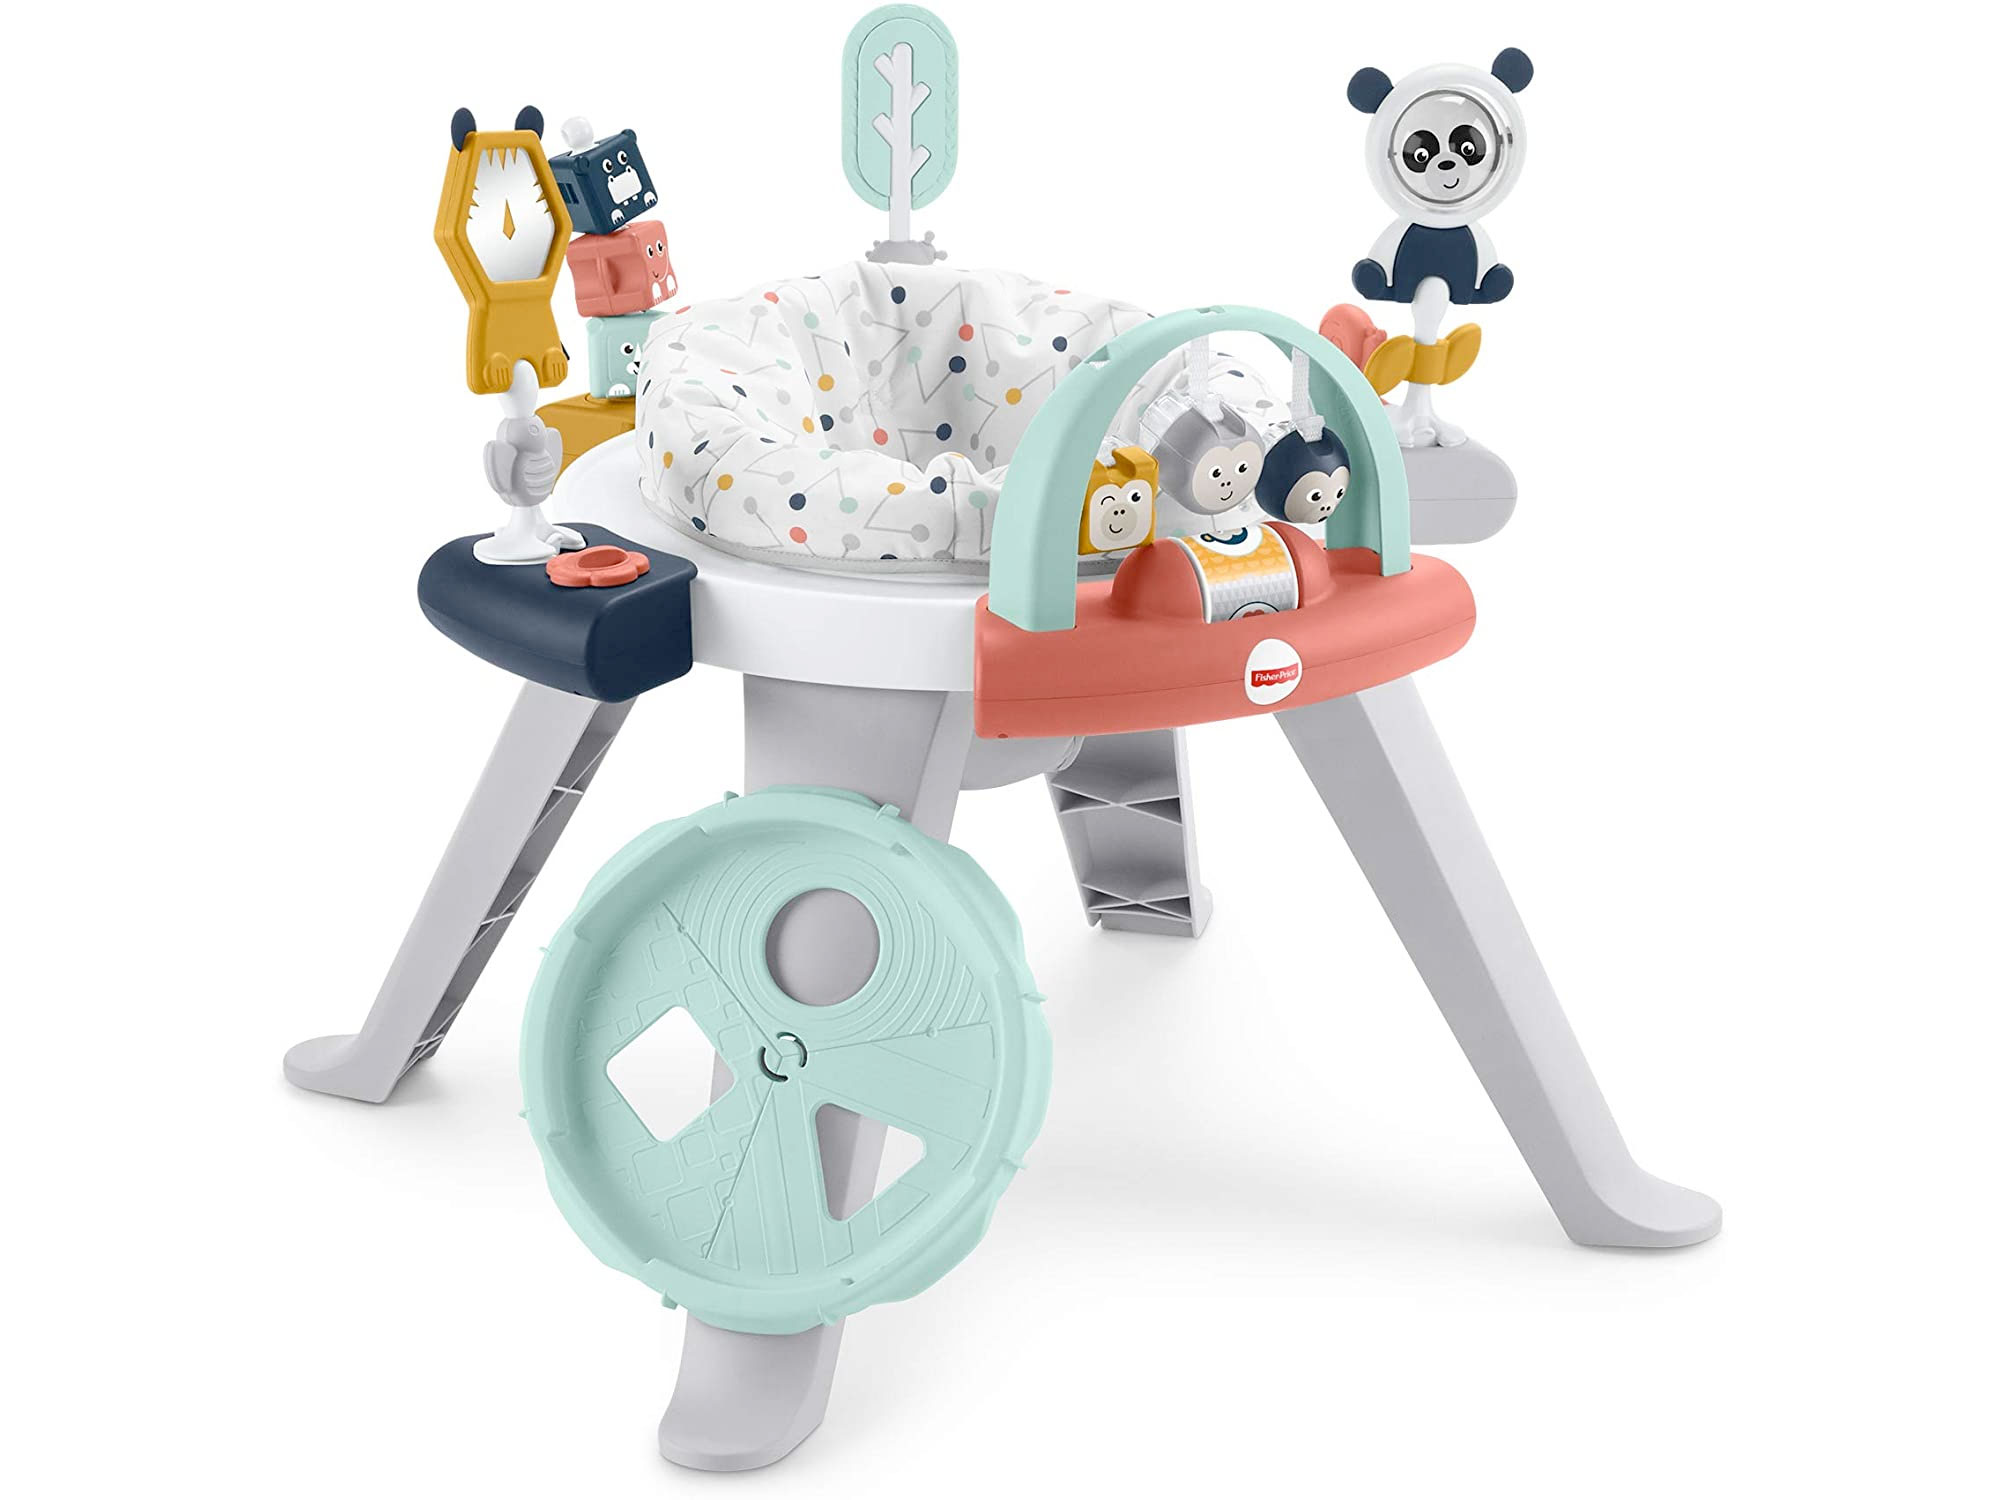 Amazon：Fisher-Price 3-In-1 Spin & Sort Activity Center只賣$59.97